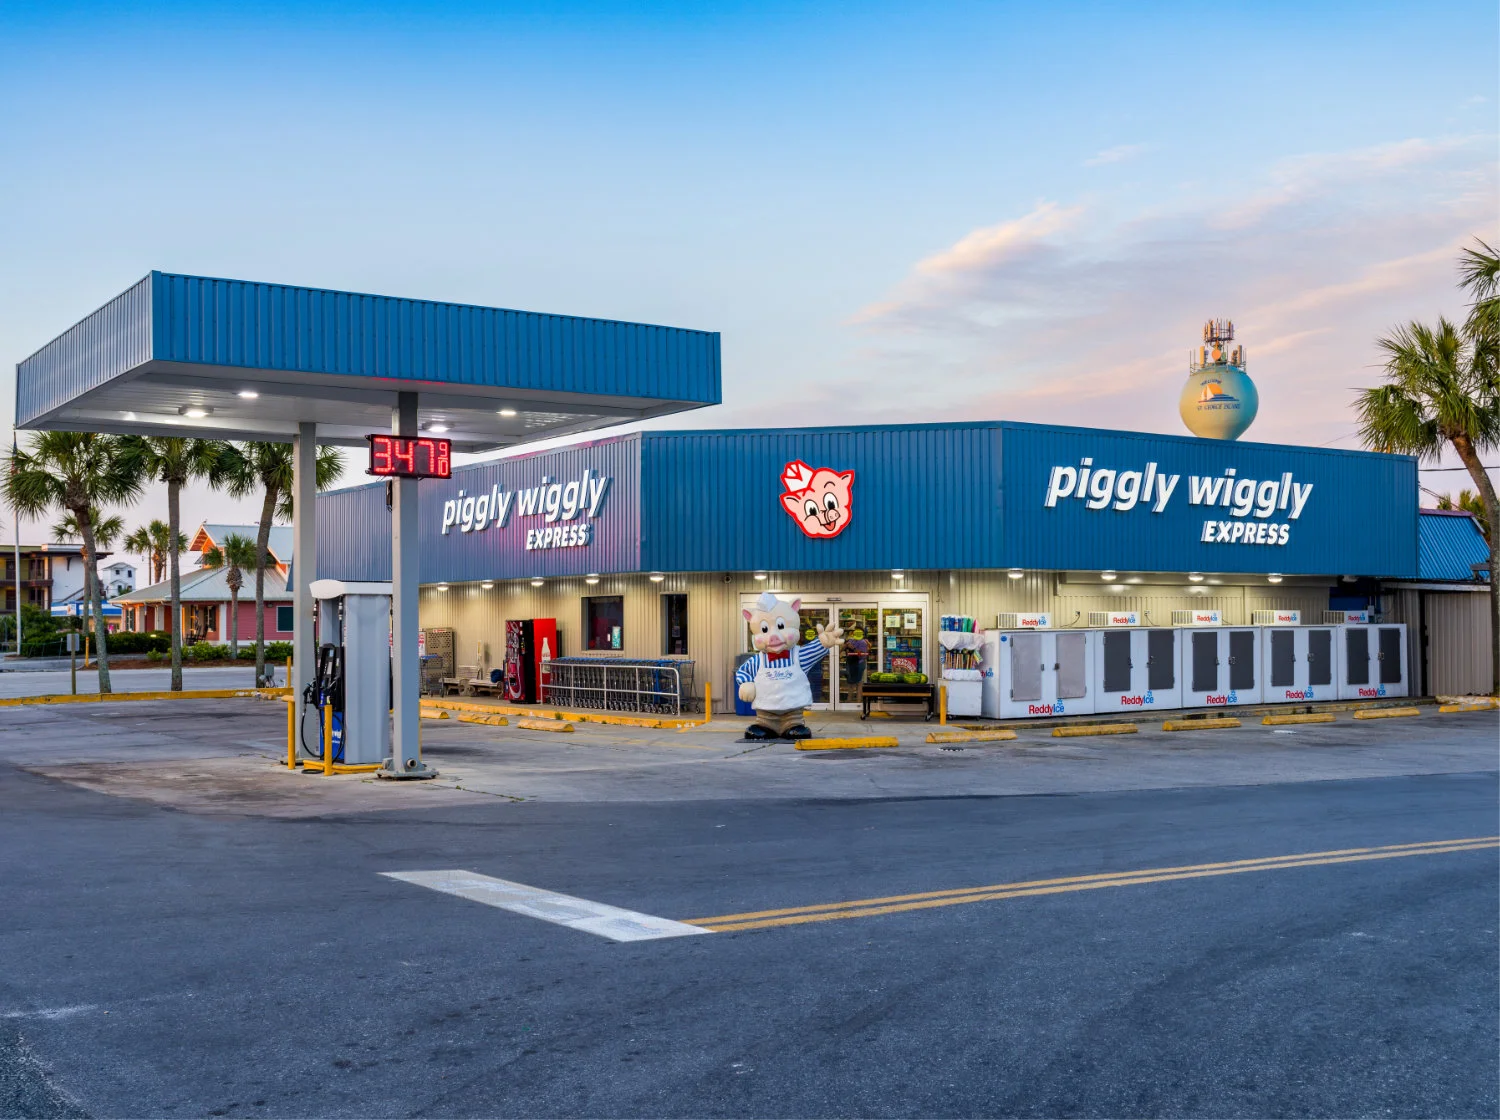 Piggly Wiggly Express